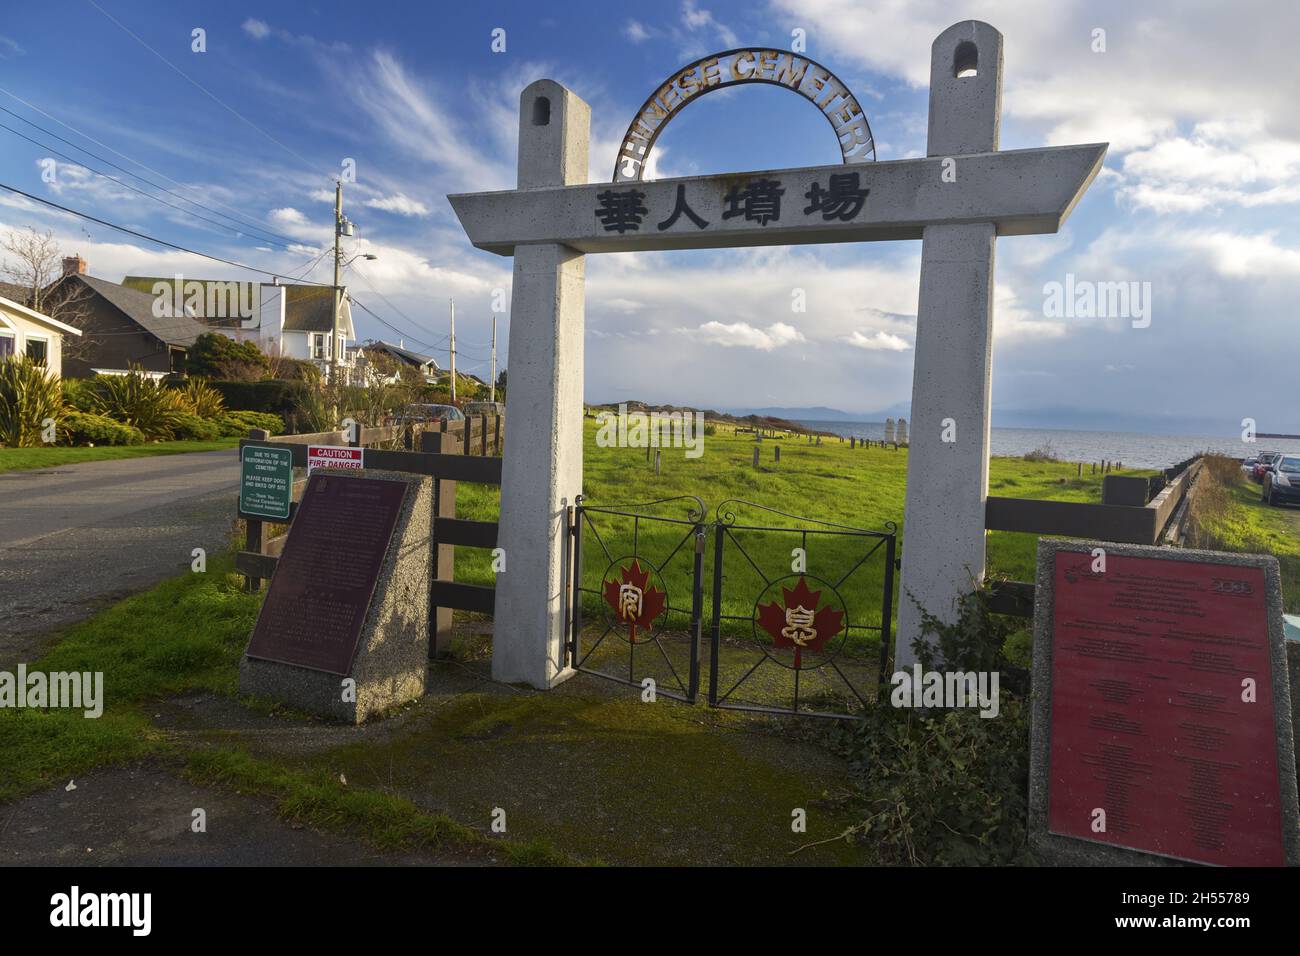 Cemetery Entrance Gate with Chinese Text Symbols at Harling Point in Oak Bay on Vancouver Island, Victoria British Columbia Canada Stock Photo